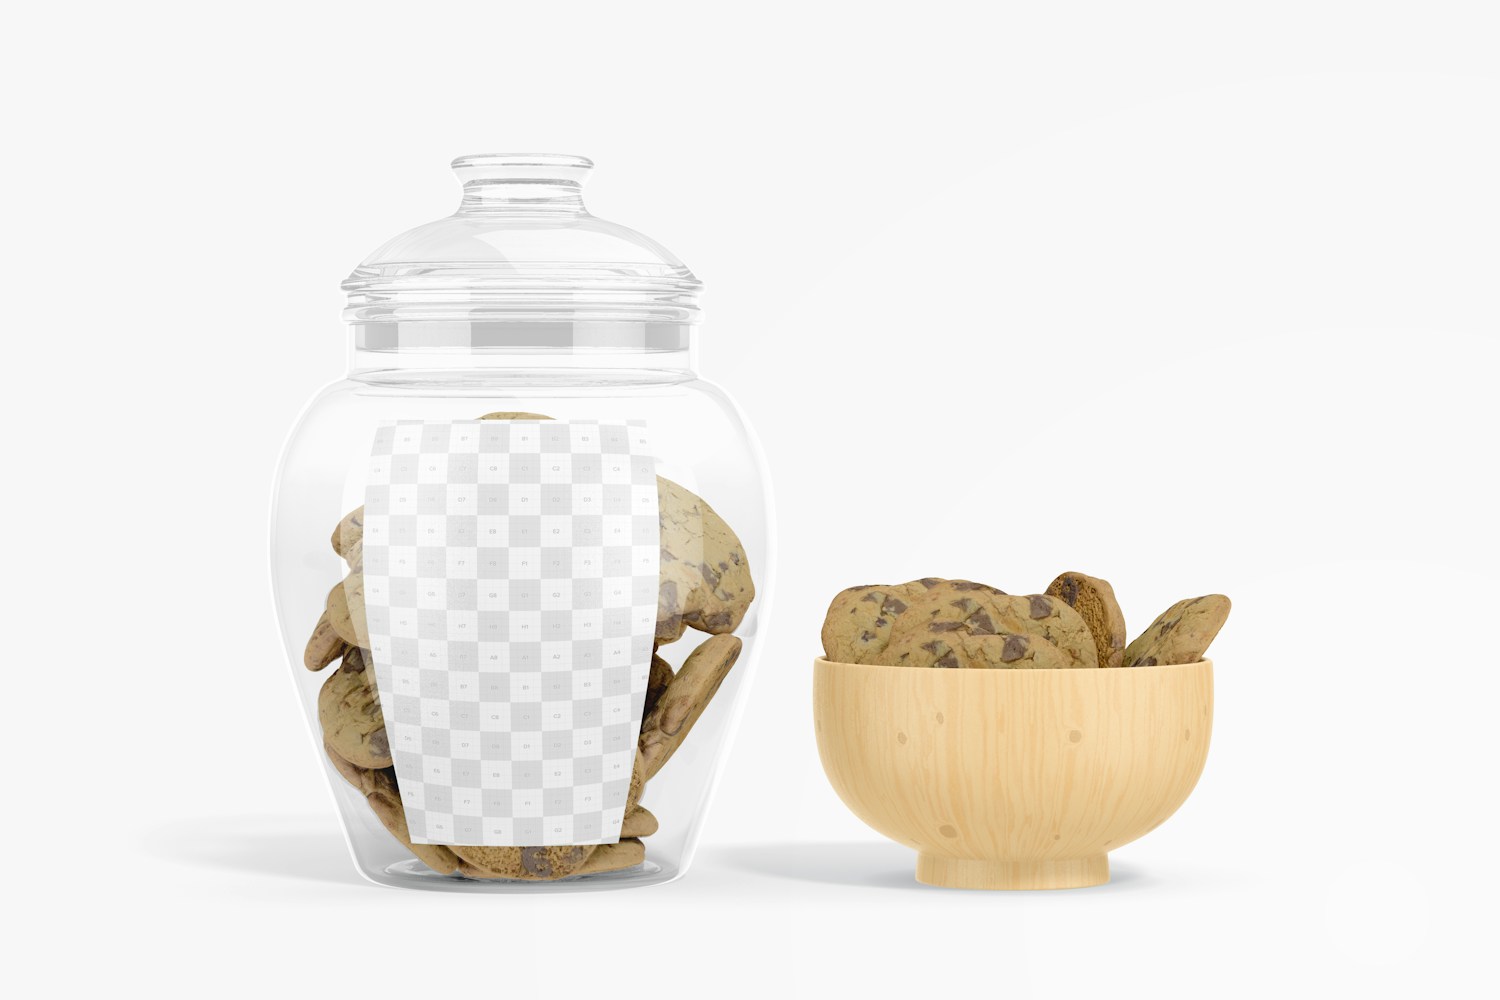 Stubby Cookie Jar Mockup, Front View